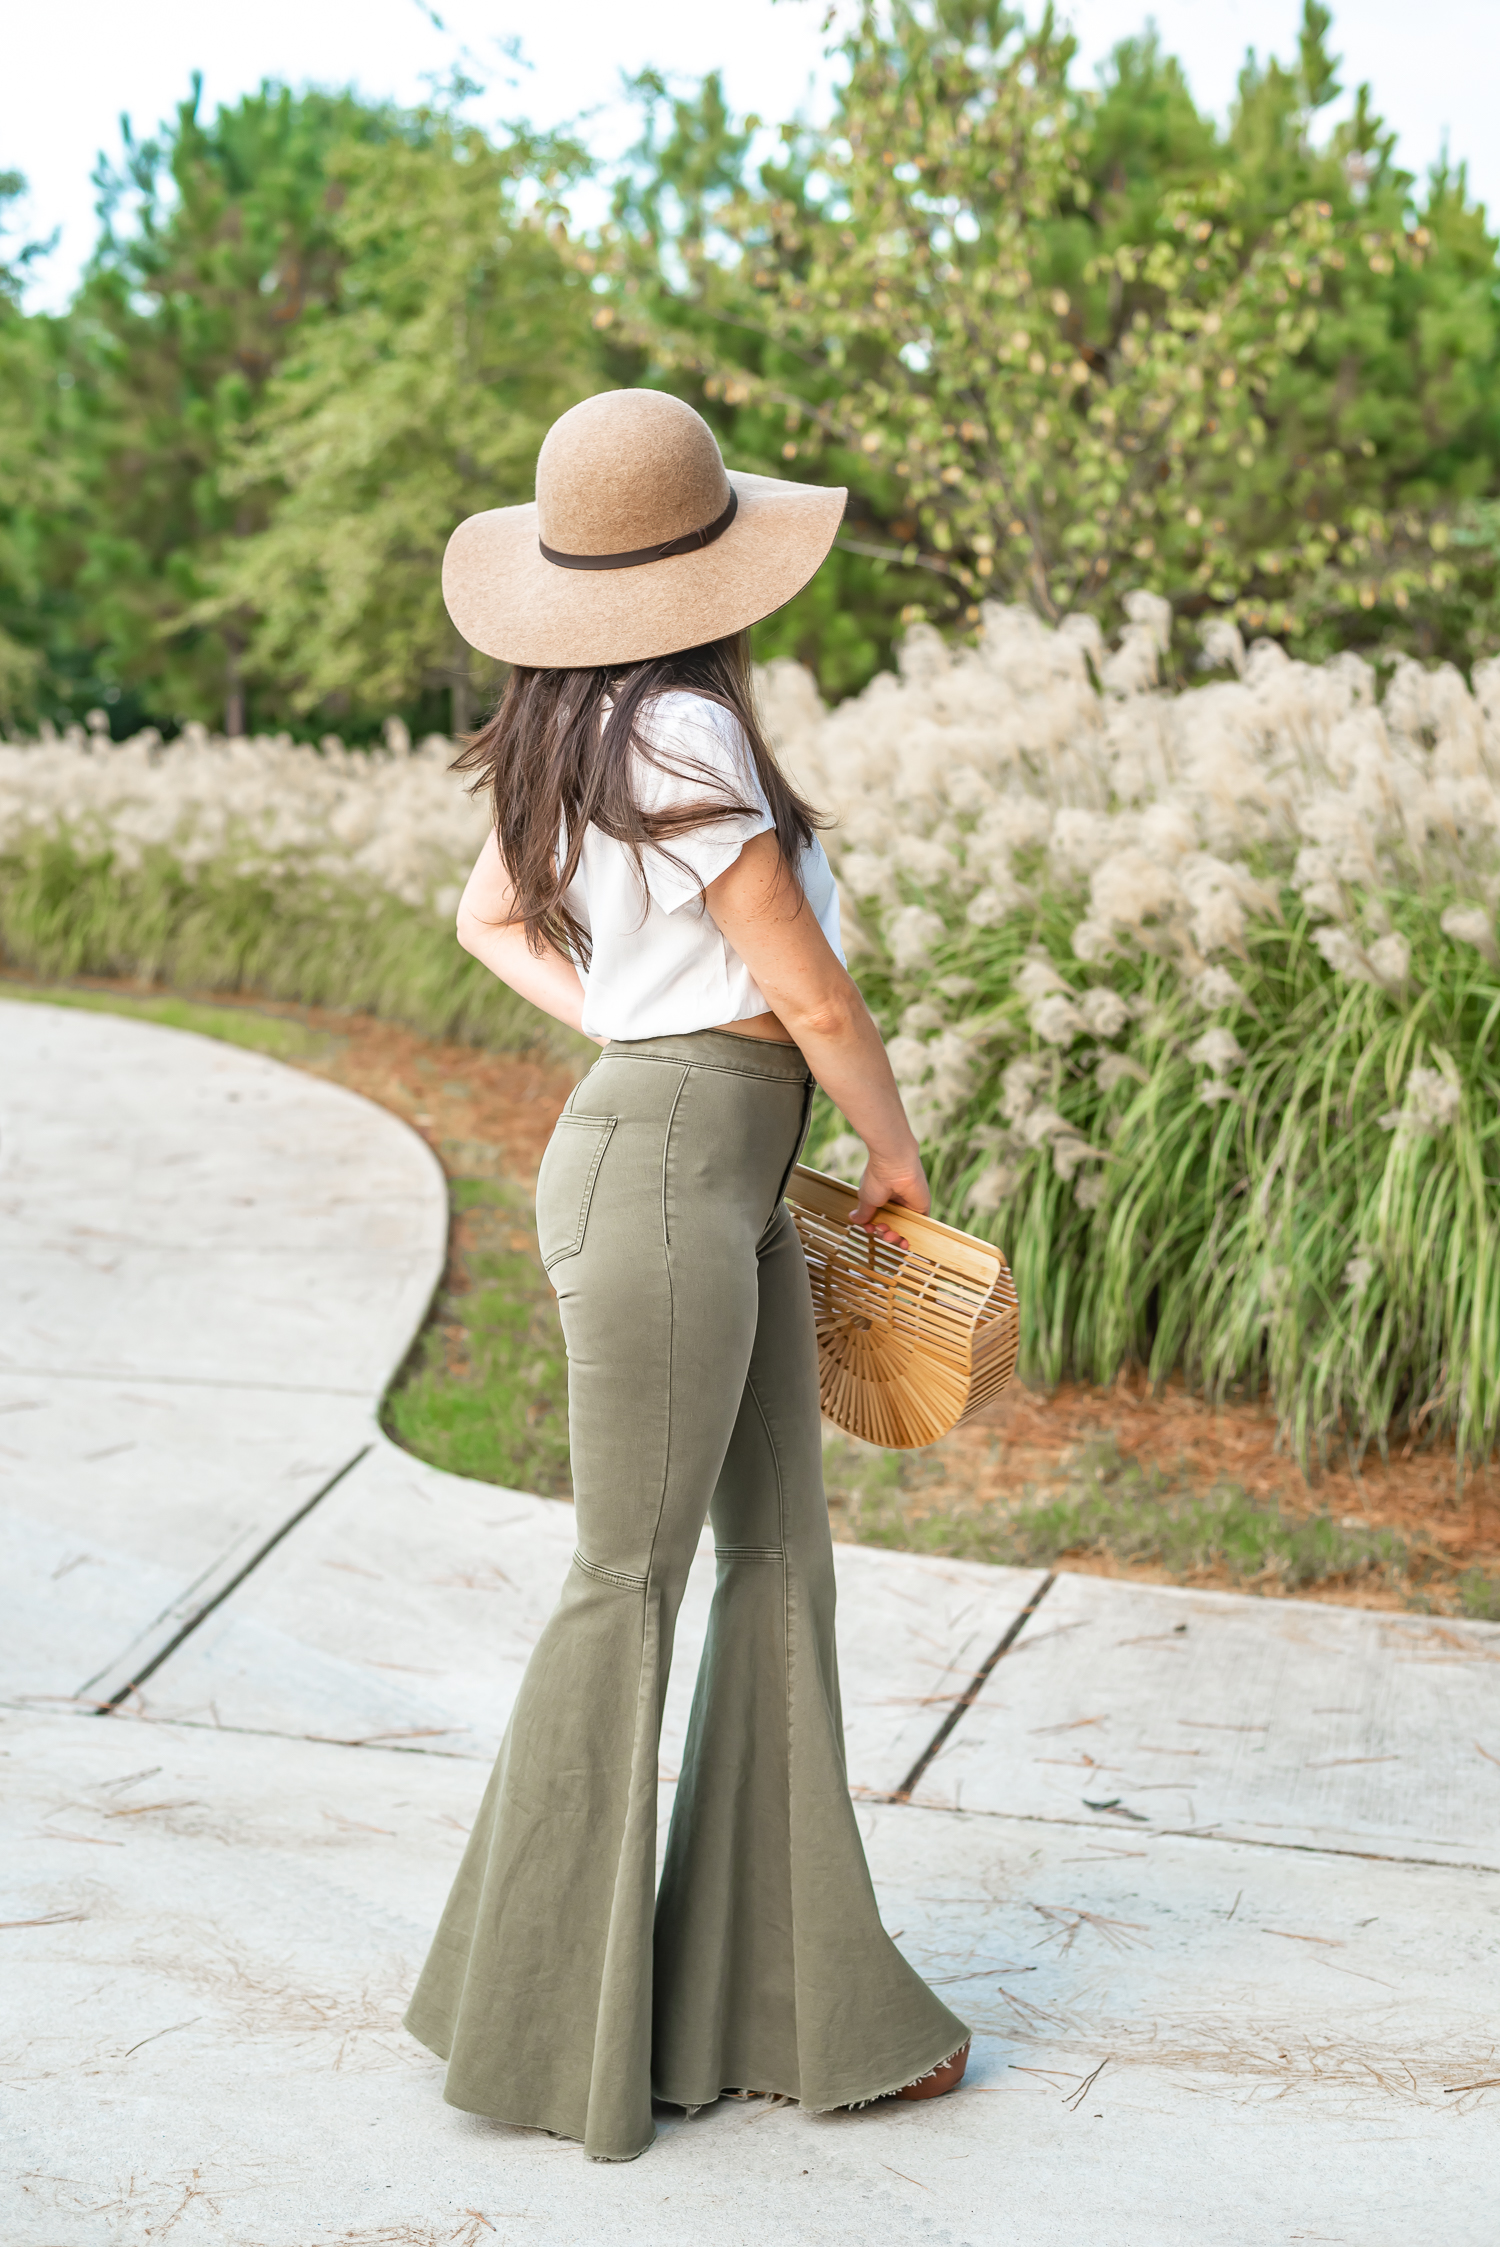 70's Vibes - Bellbottoms & Platform Shoes - Wander in Color - a style,  travel & lifestyle blog by Erica Valentin